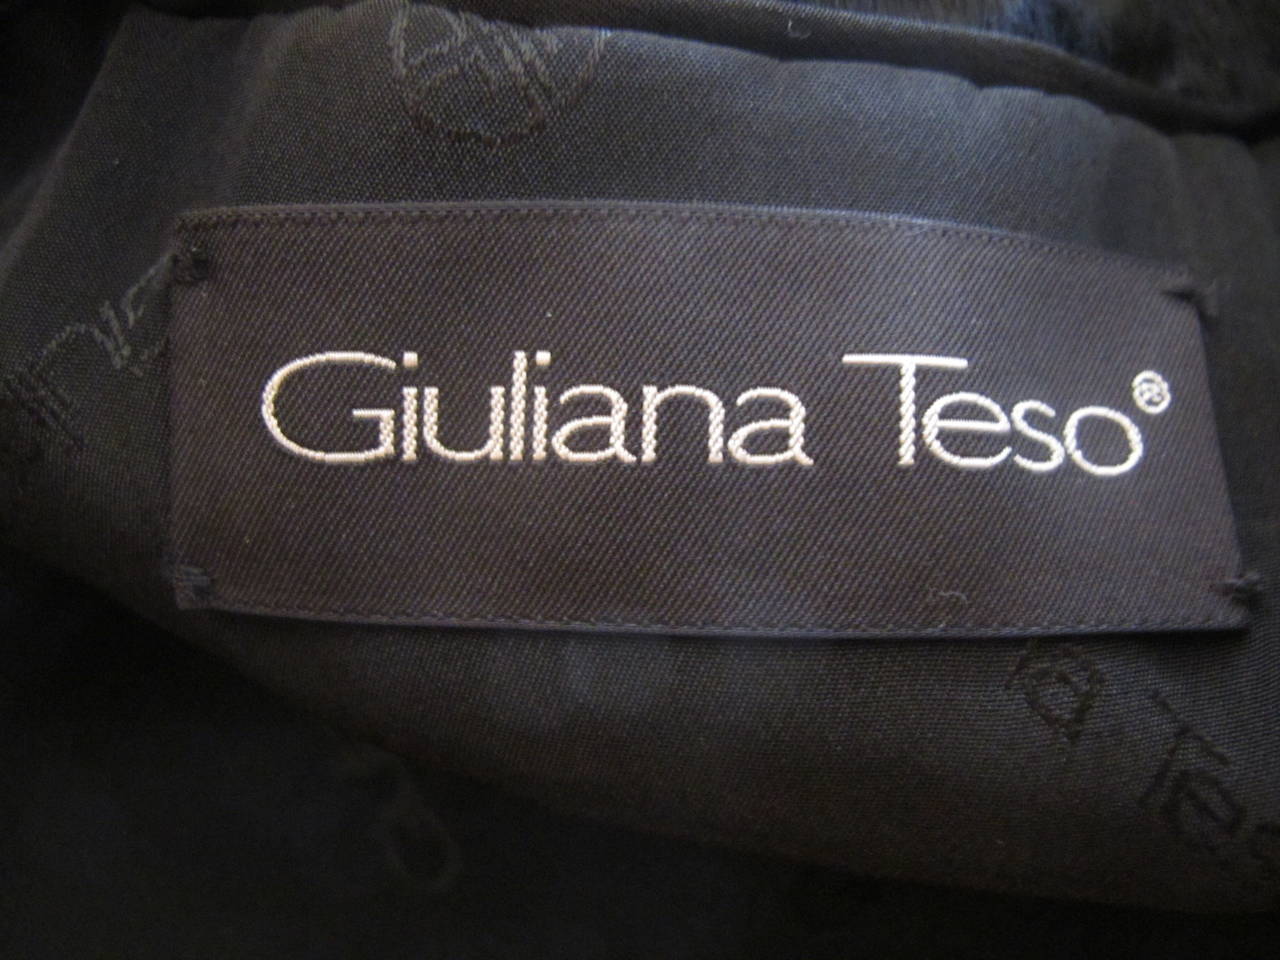 Giuliana Teso Black Broadtail Jacket for Neiman Marcus For Sale 5